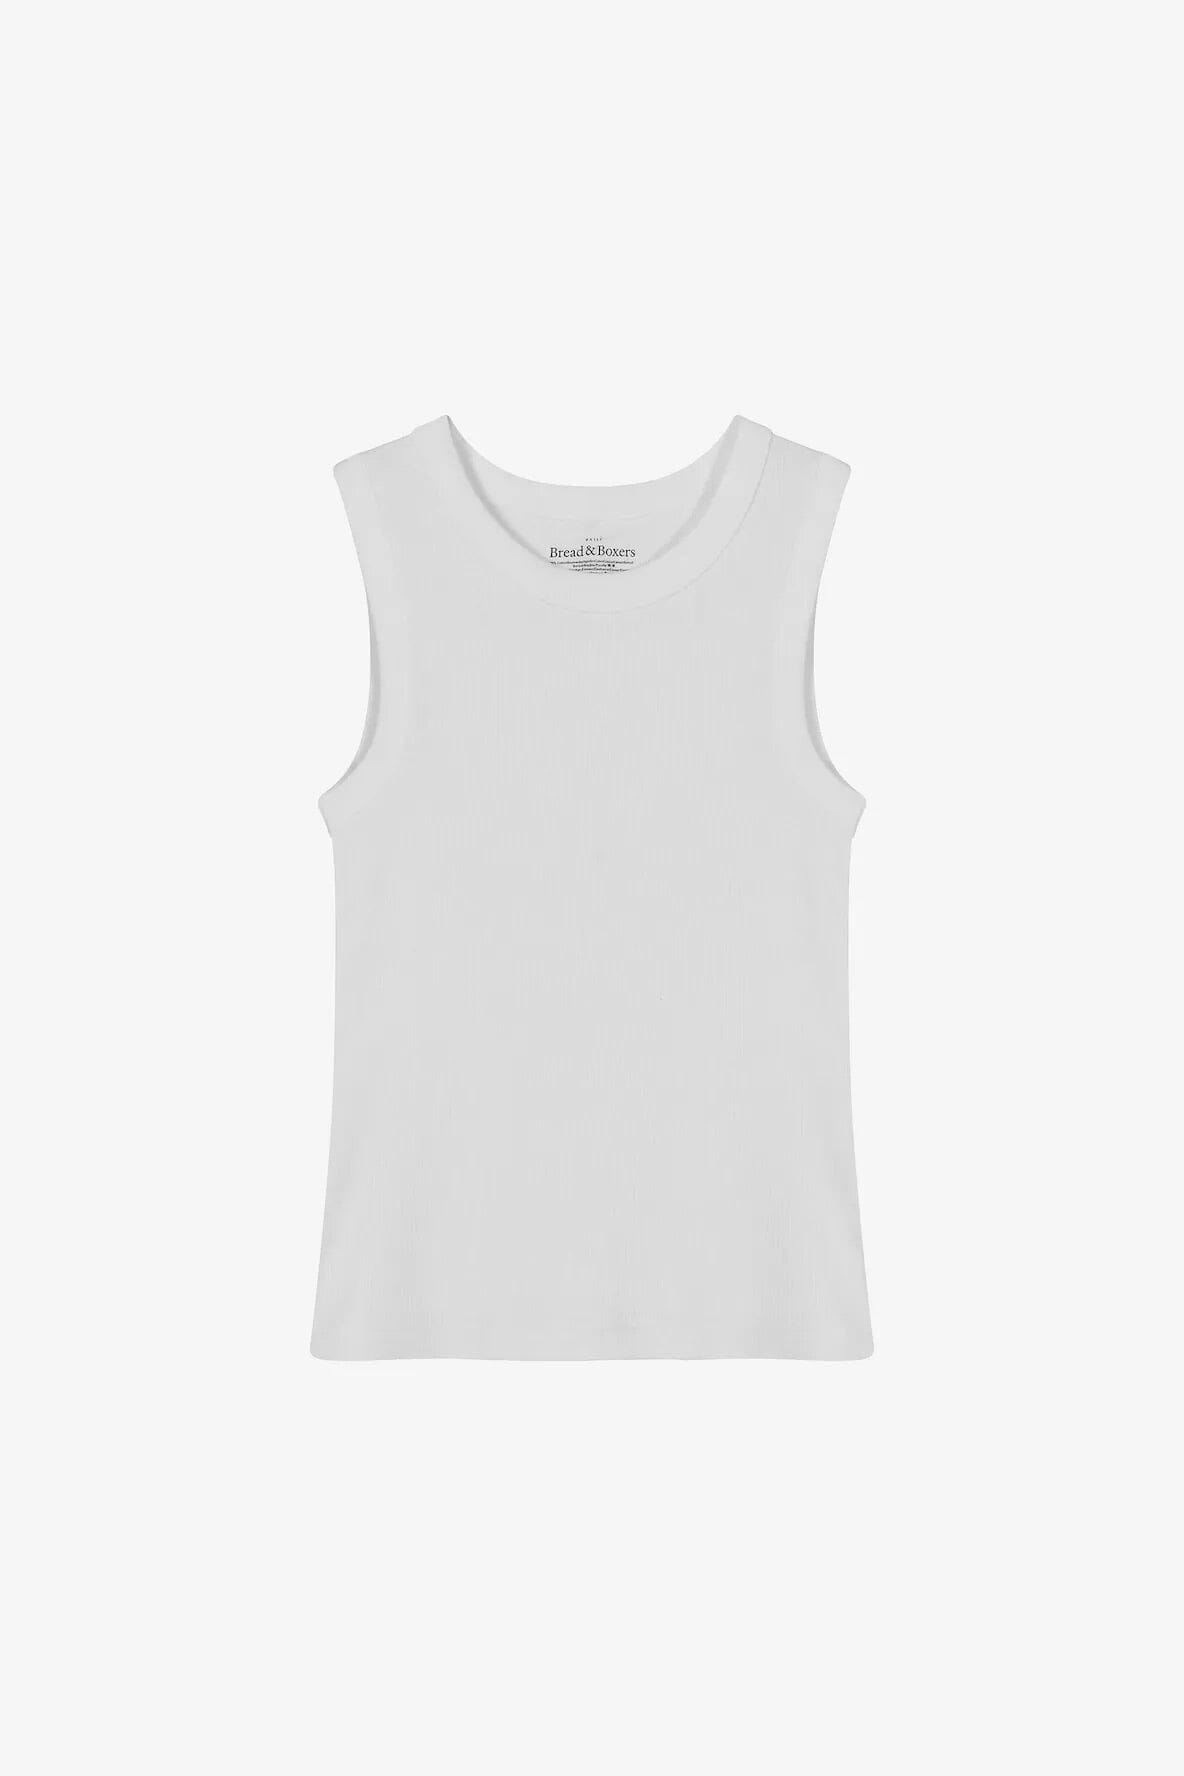 Bread and Boxers Tank Crew-Neck White T-shirt